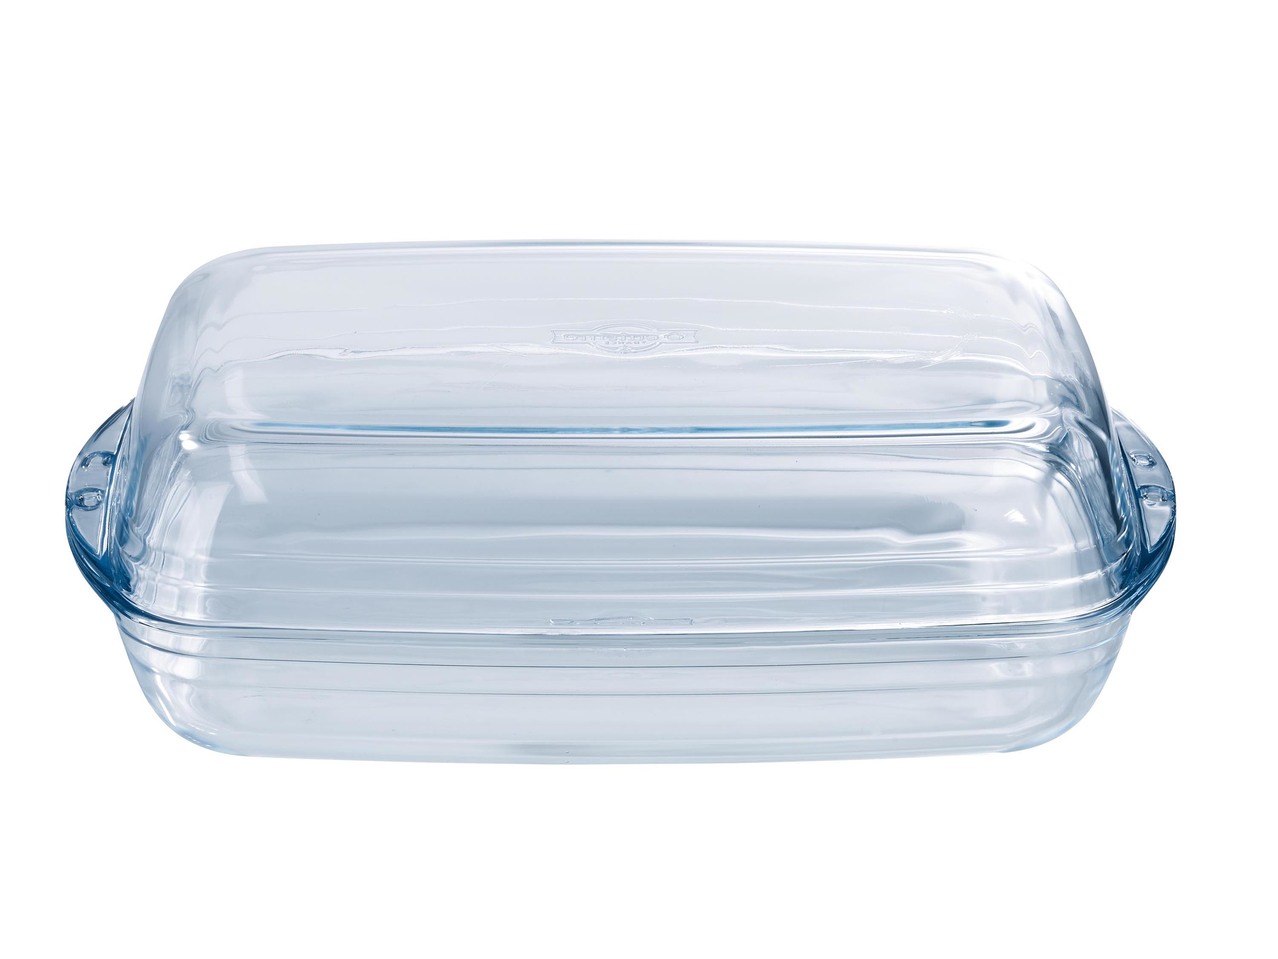 Glass Baking or Casserole Dish with Lid, 2 pieces